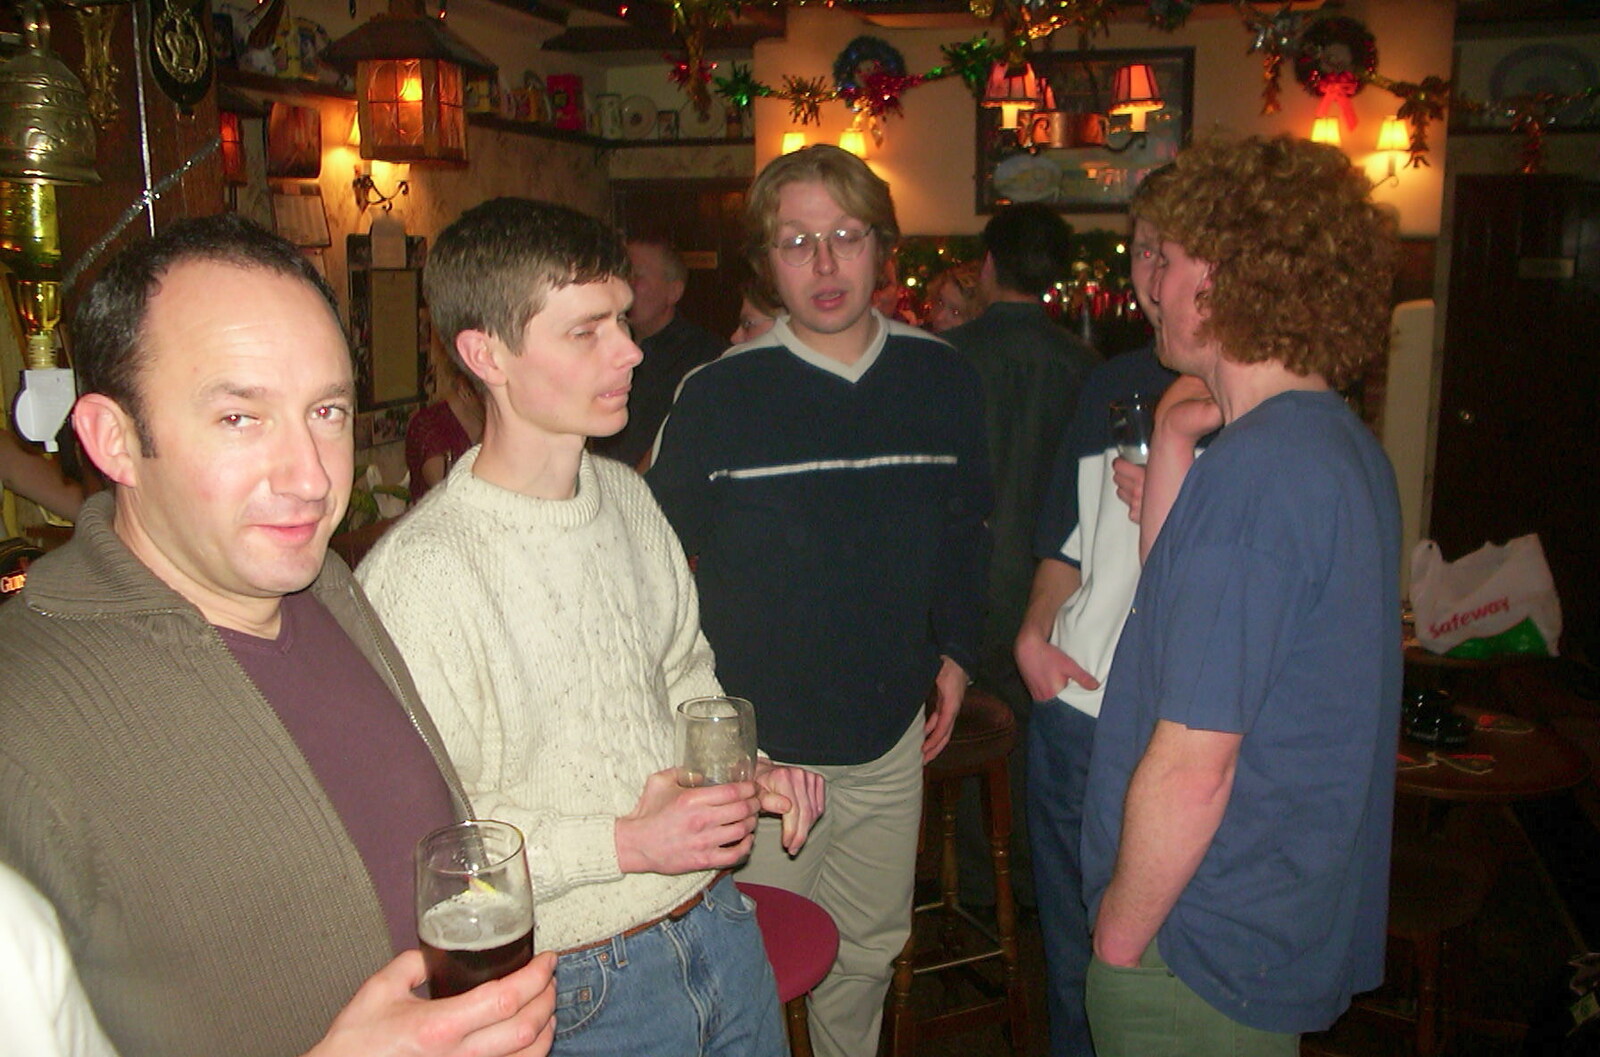 New Year's Eve at the Swan Inn, Brome, Suffolk - 31st December 2002: DH, Ninja M, Marc and Wavy